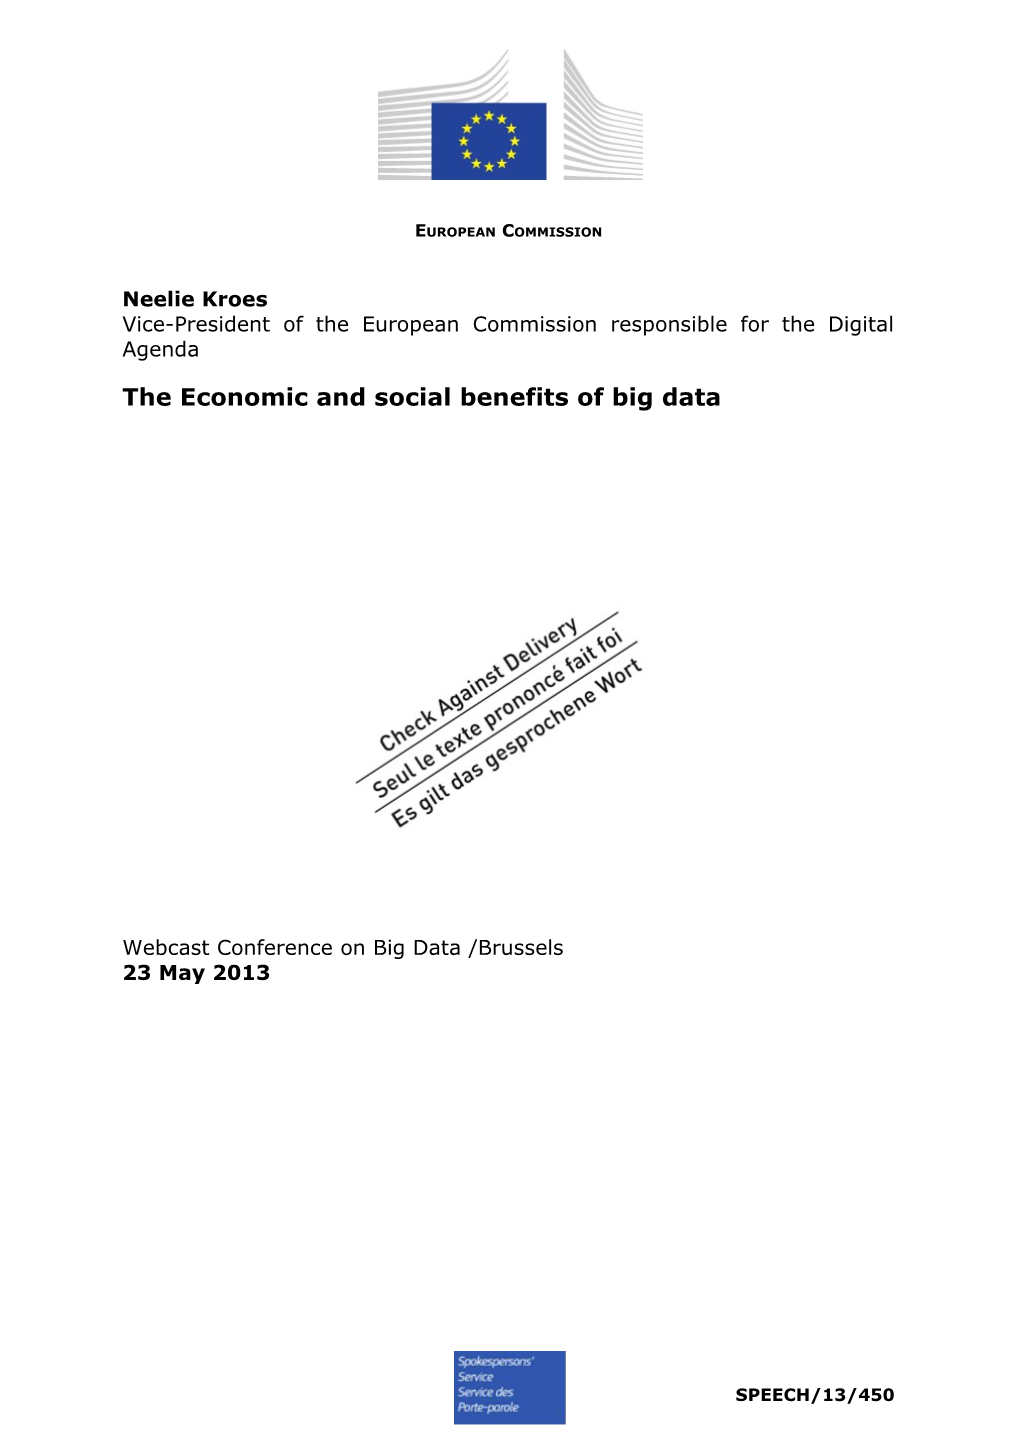 The Economic and Social Benefits of Big Data